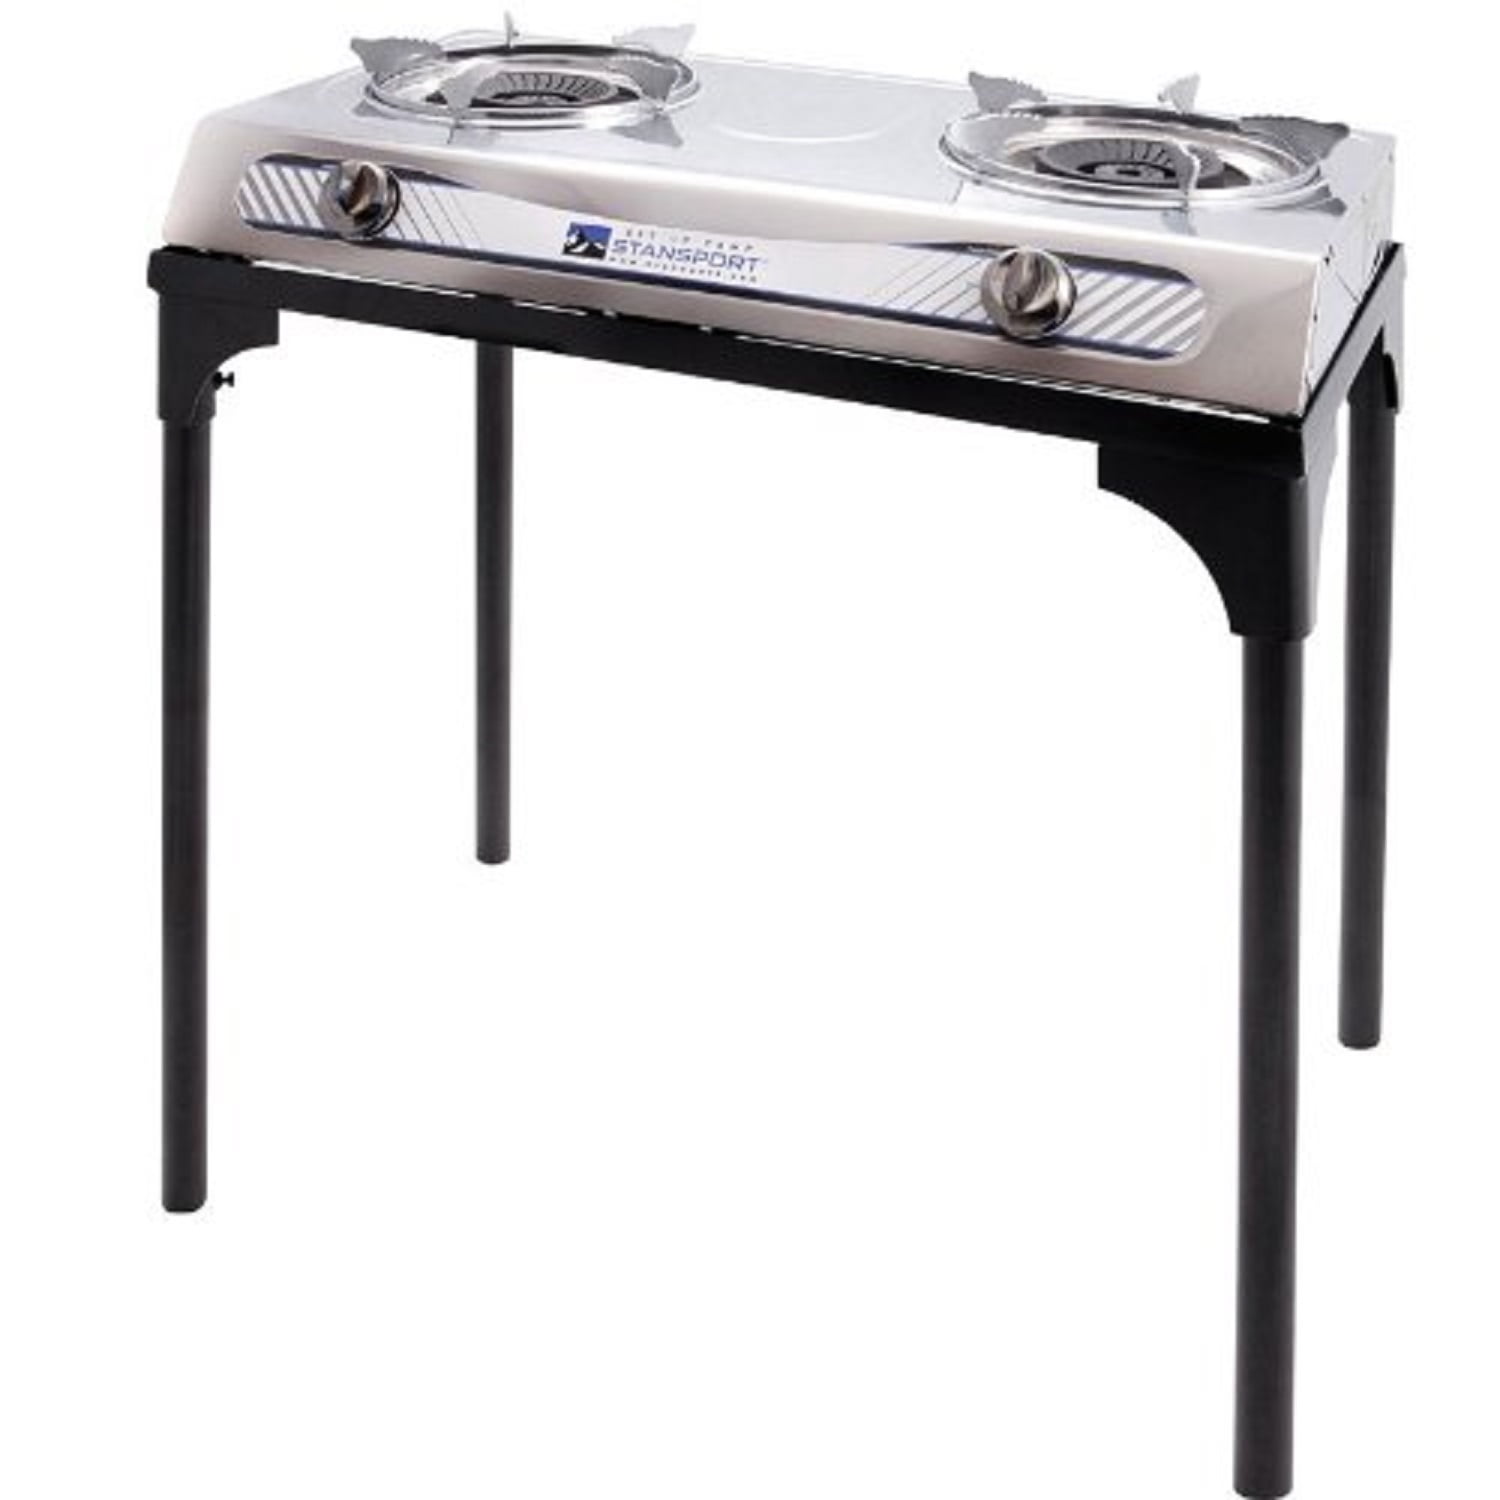 Stainless Steel 2 Burner Cooker Propane Stove Gas Portable Benchtop In/Outdoor 